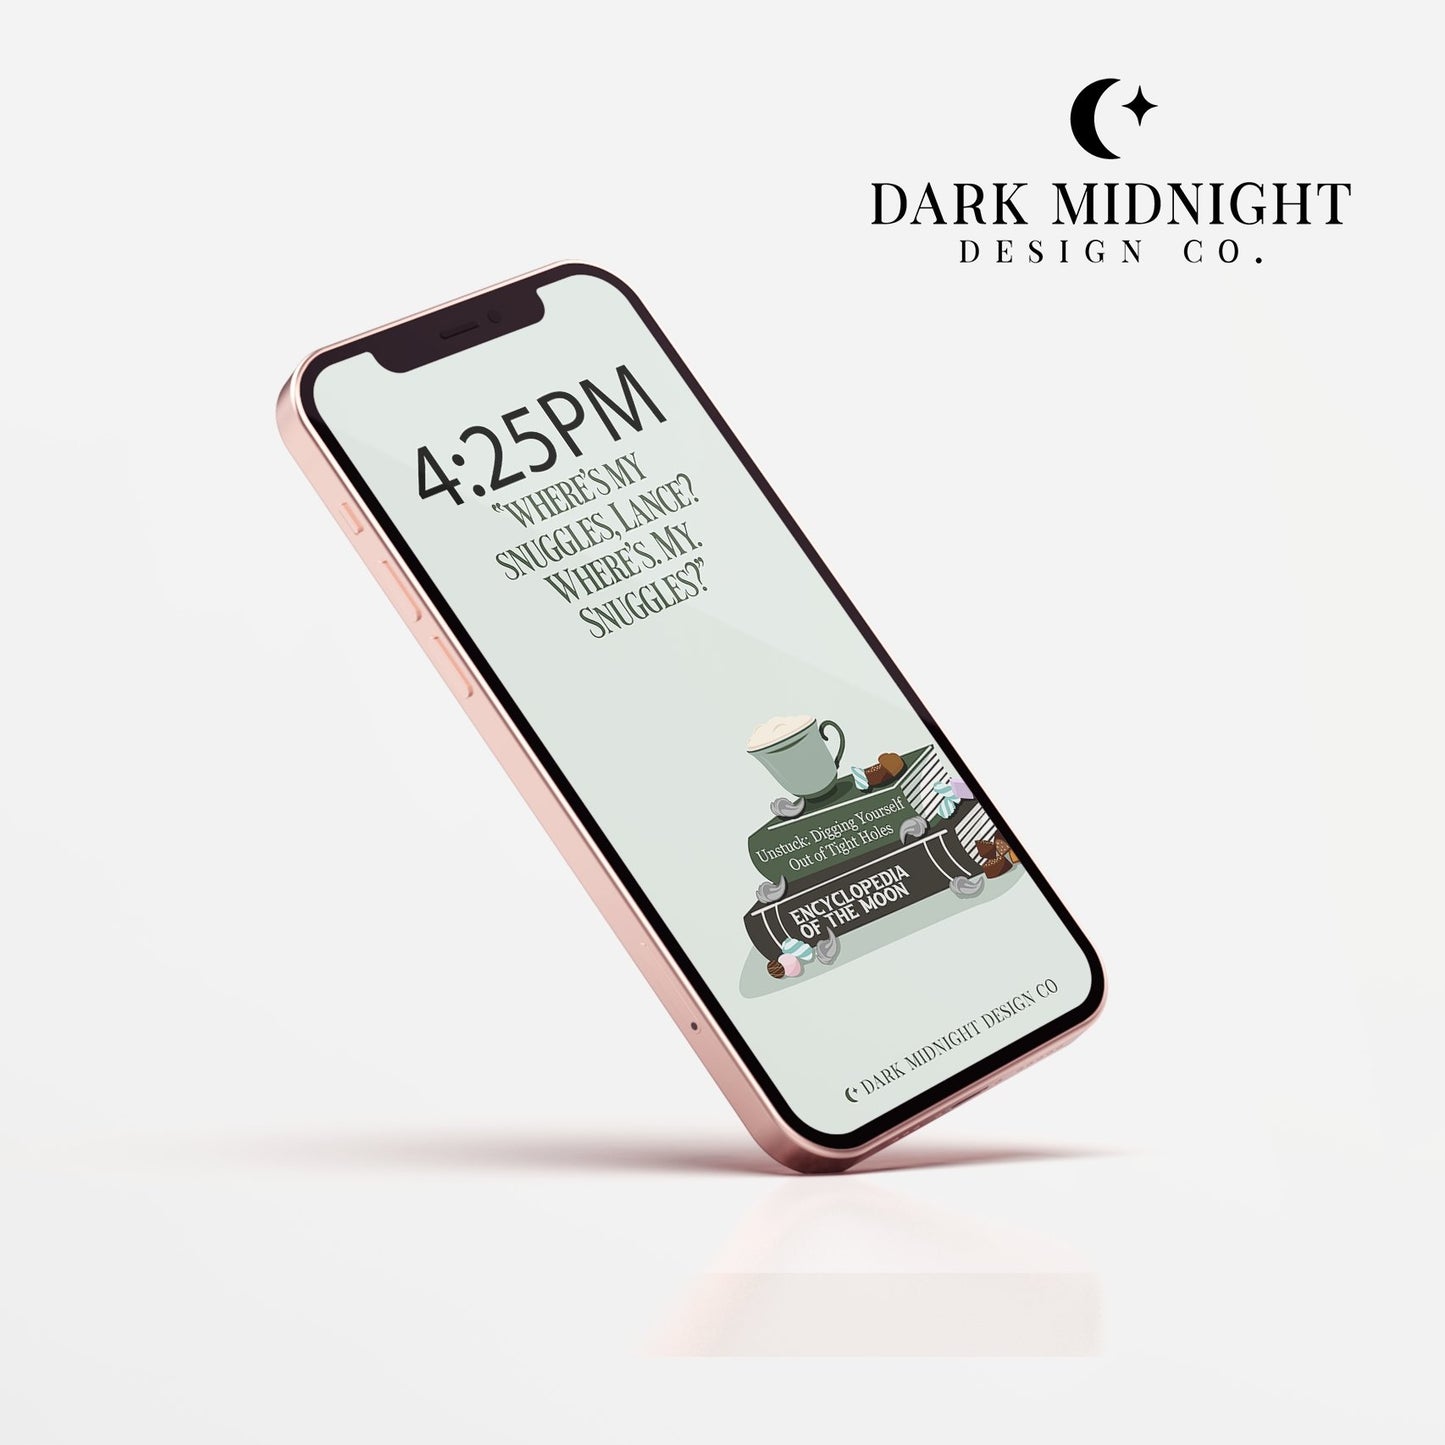 Character Anthology Phone Wallpaper - Seth Capella - Officially Licensed Zodiac Academy Phone Wallpaper - Dark Midnight Design Co